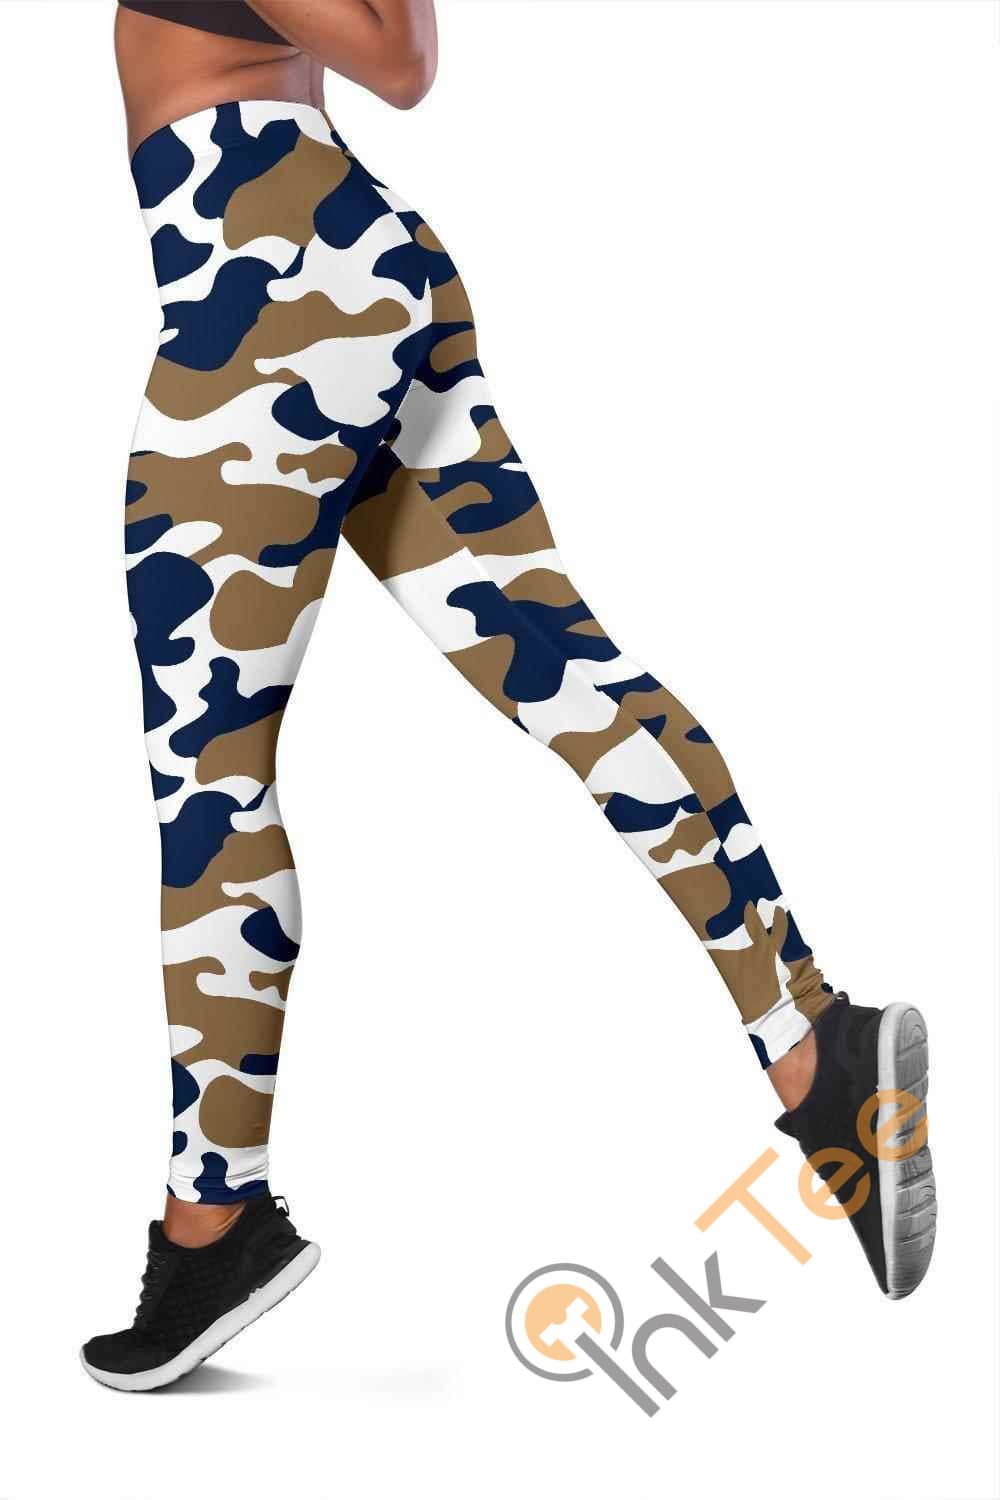 Inktee Store - Los Angeles Rams Inspired Tru Camo 3D All Over Print For Yoga Fitness Fashion Women'S Leggings Image